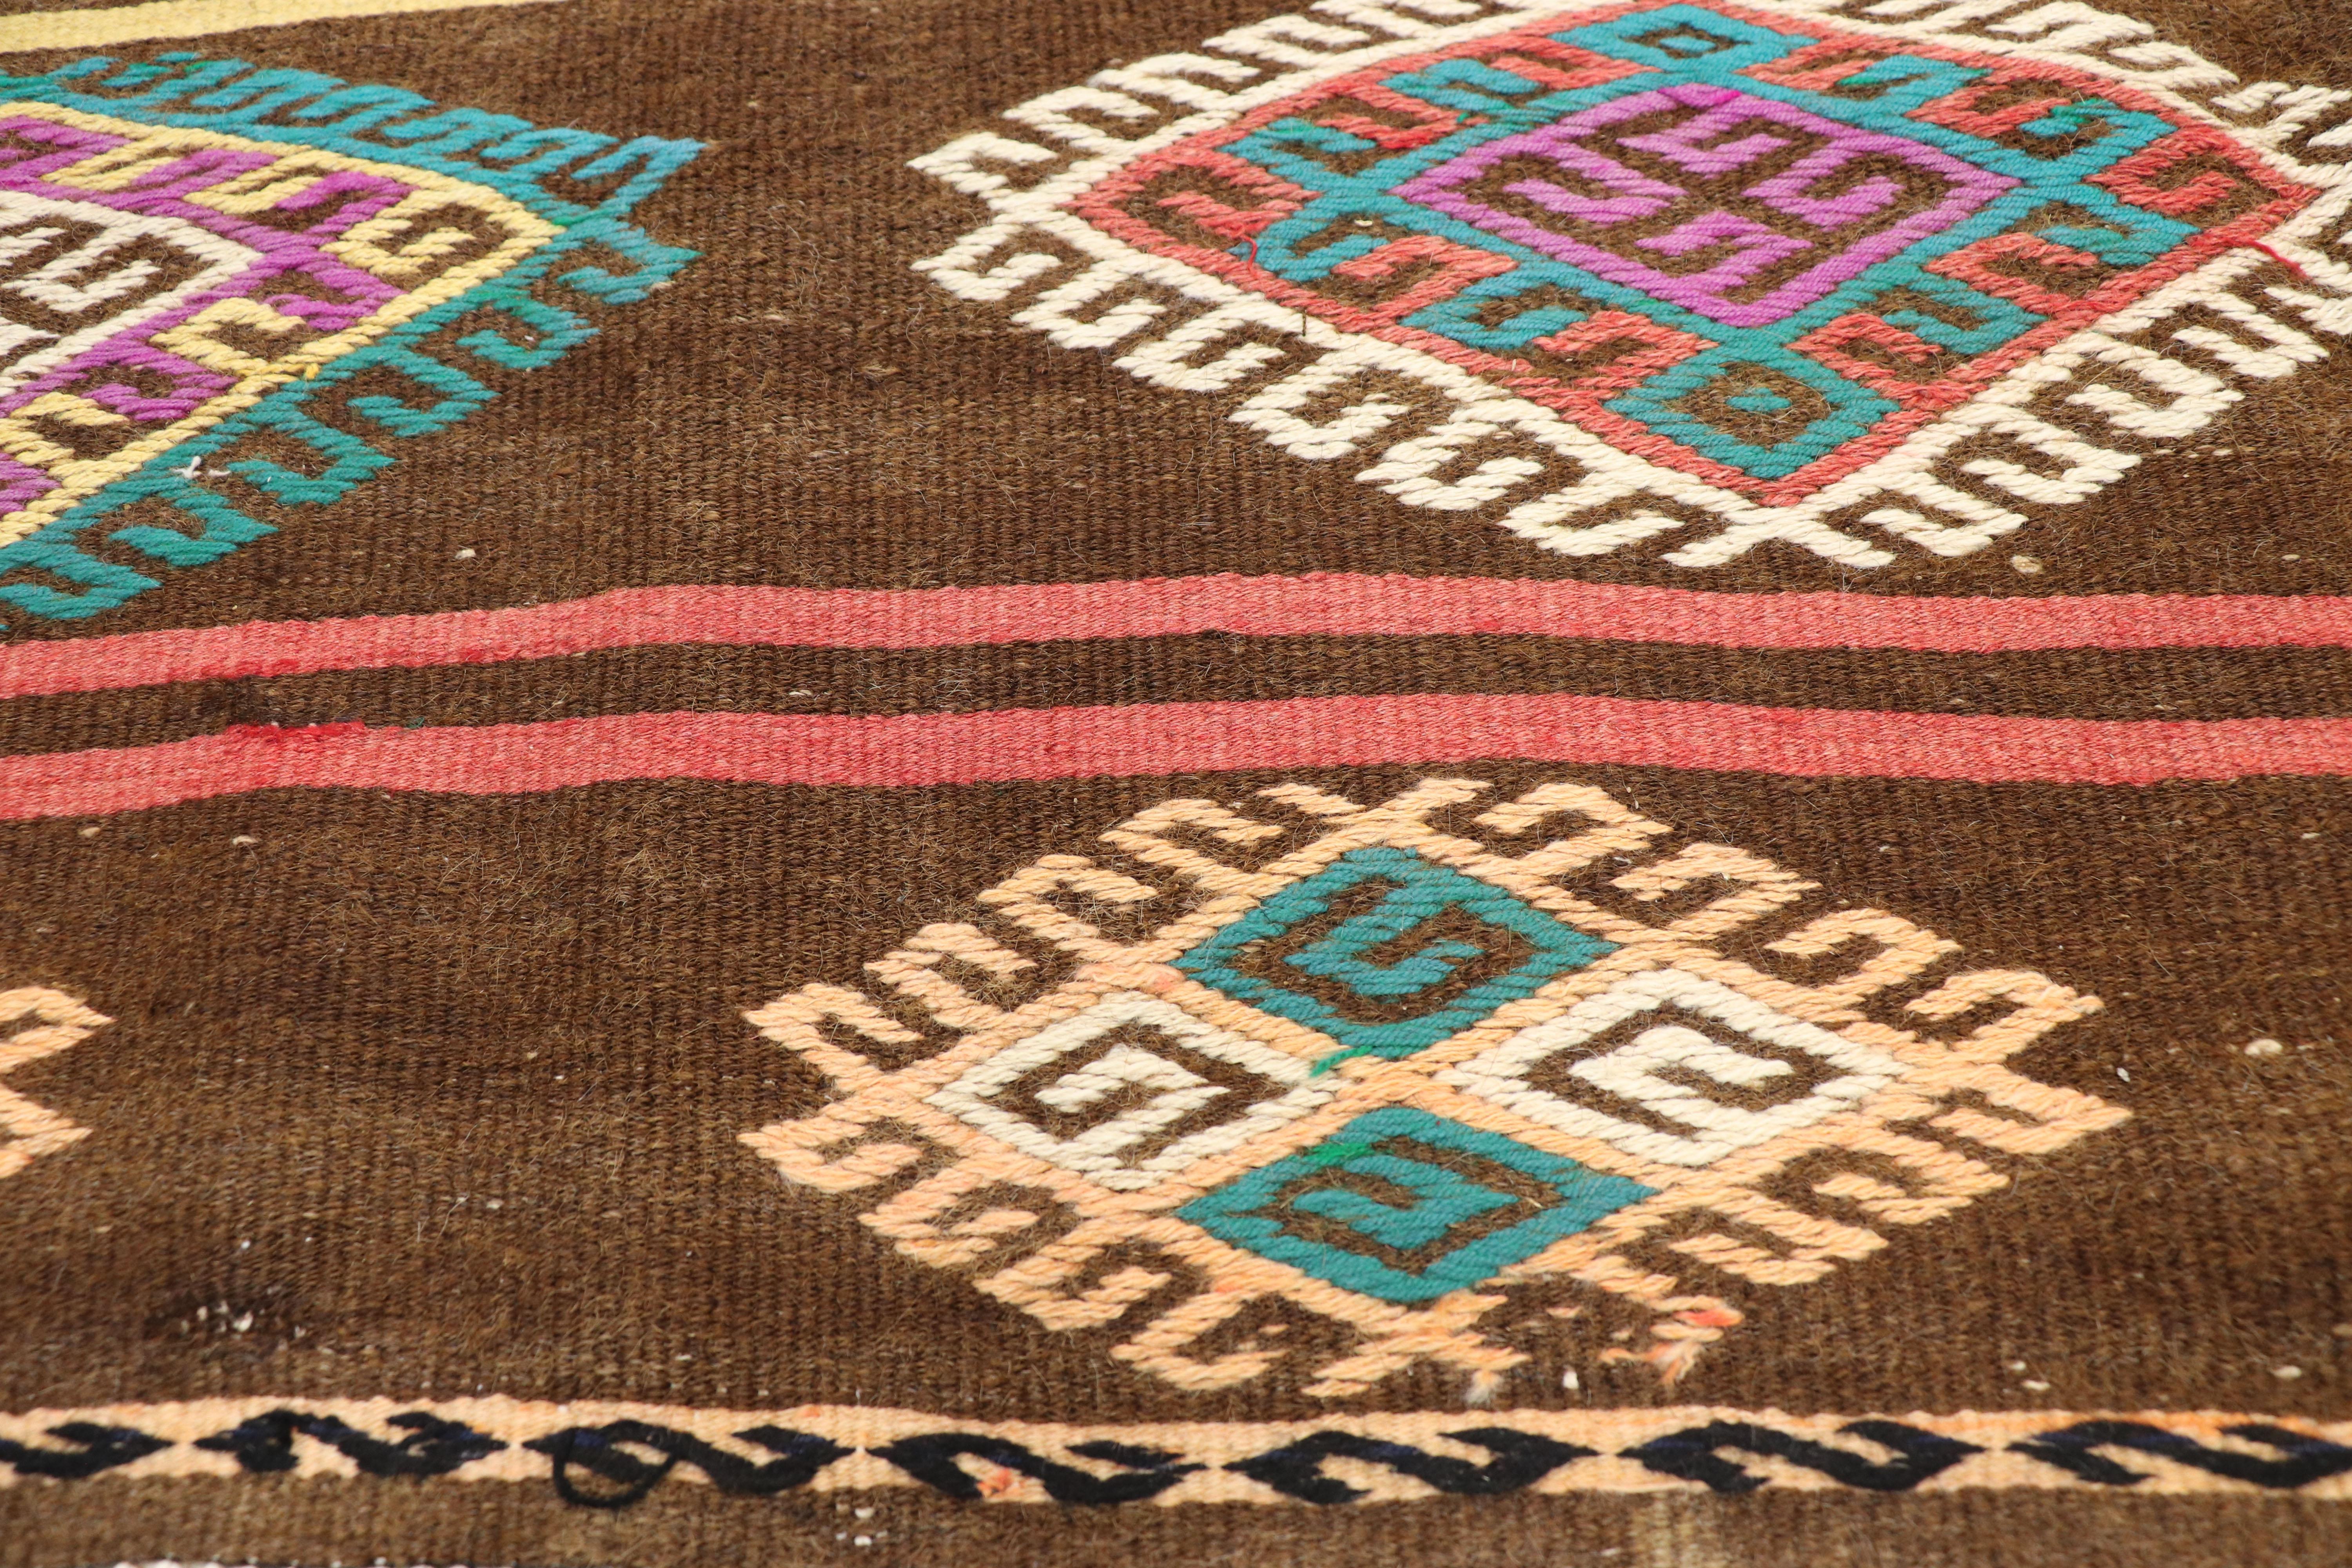 Colorful Vintage Turkish Balikesir Jajim Kilim rug with Boho Tribal Style In Good Condition For Sale In Dallas, TX